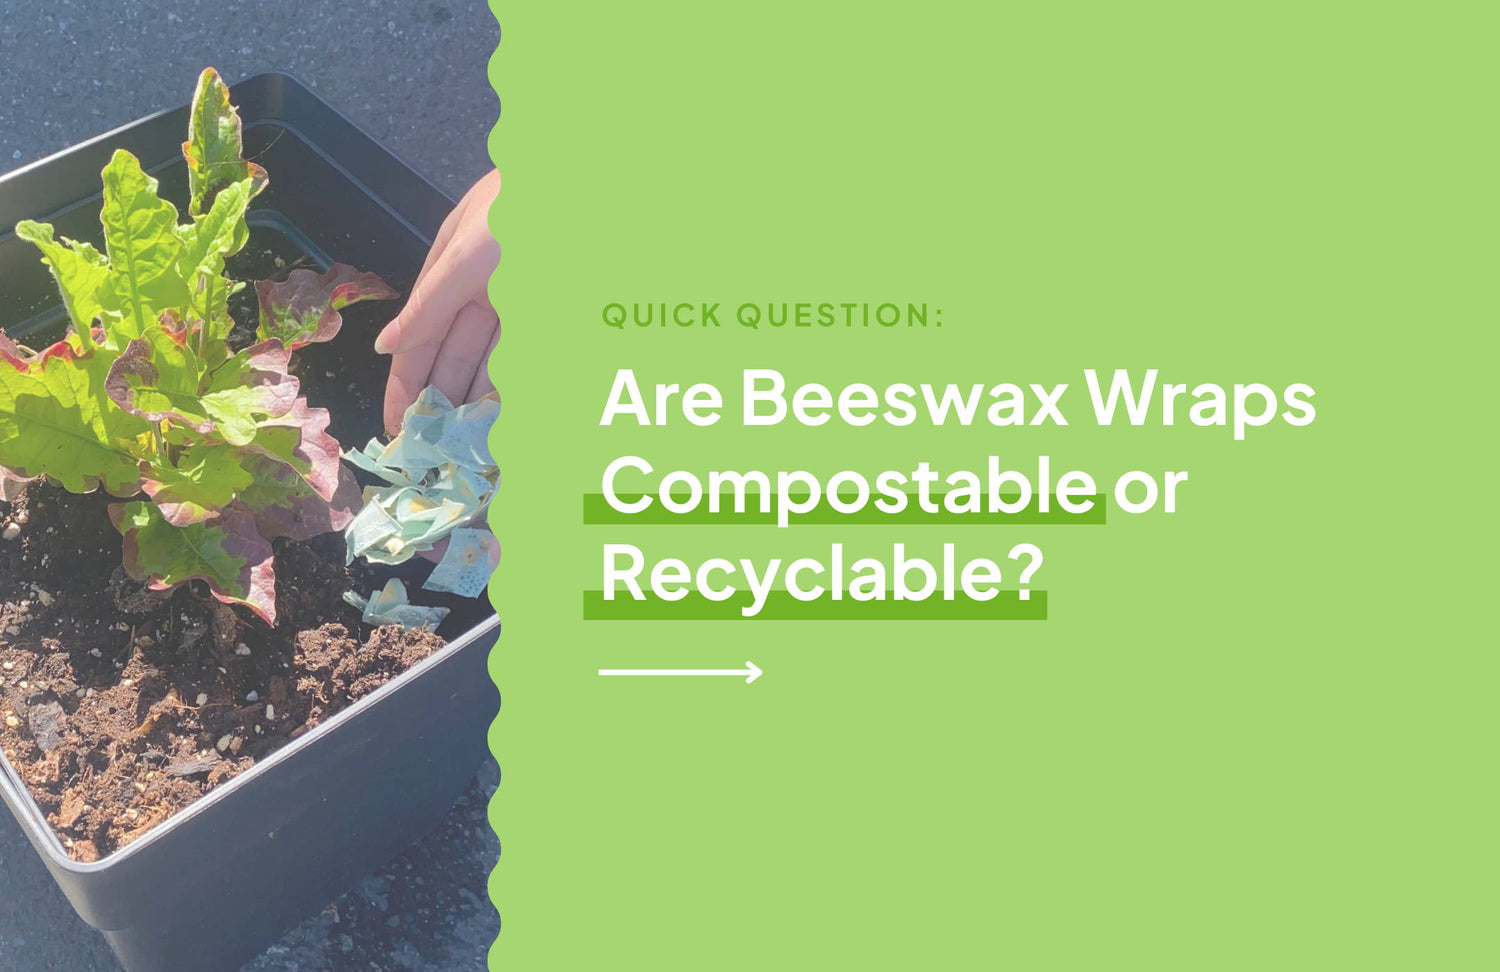 Are Beeswax Wraps Compostable or Recyclable?